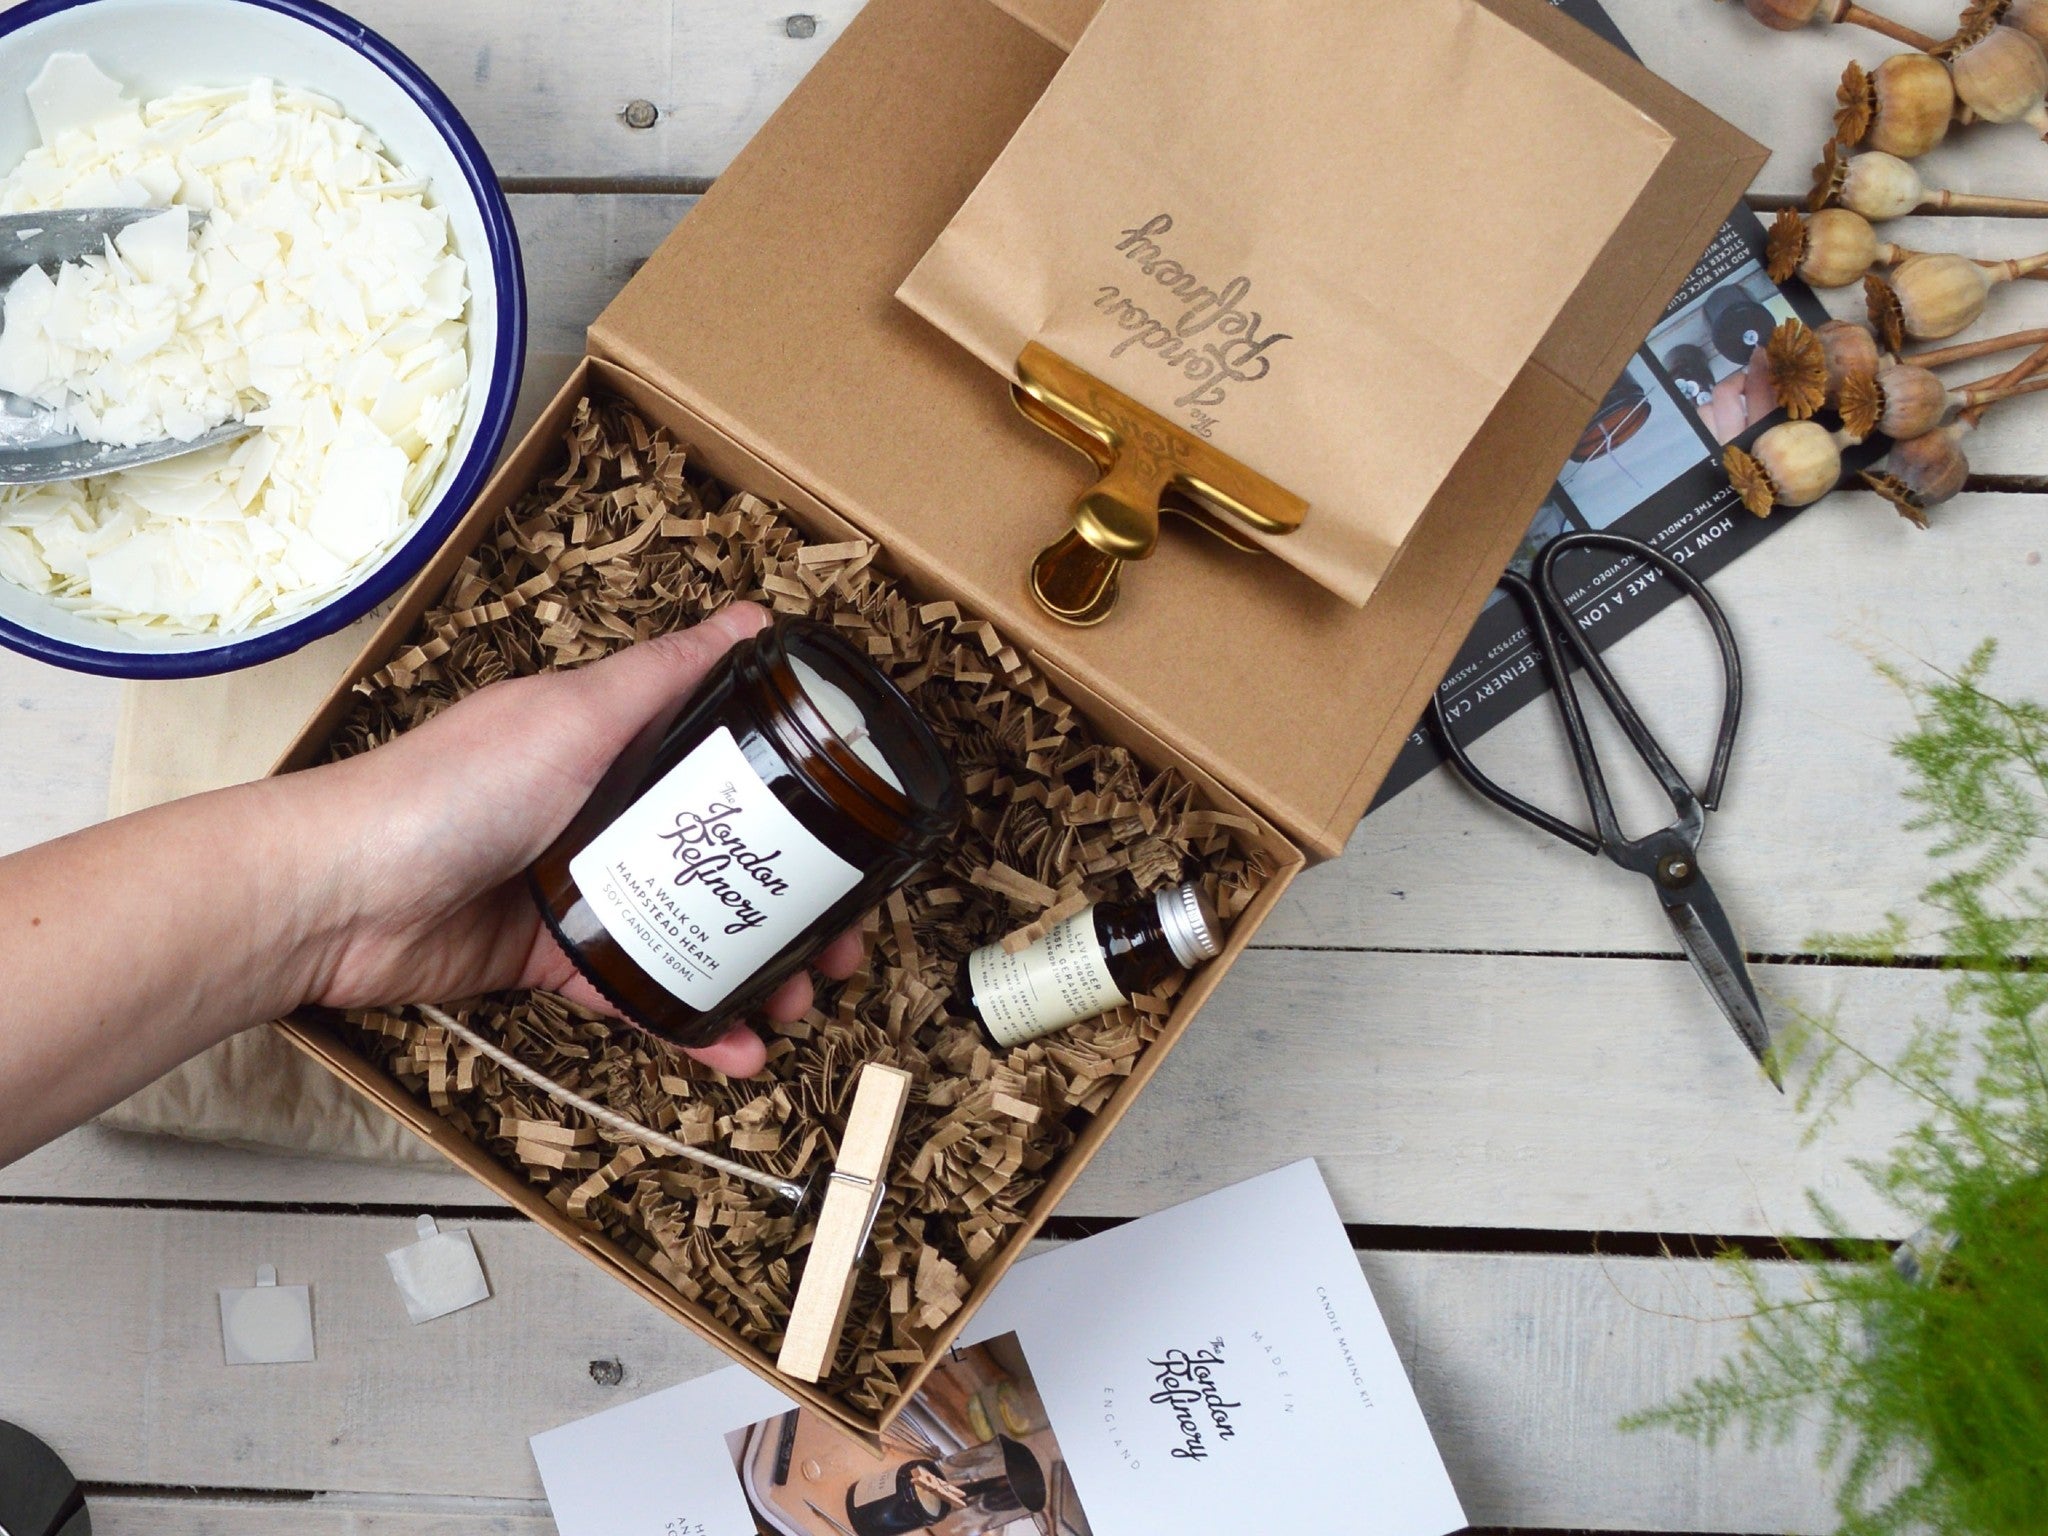 Best candle making kits 2021: Scented and sustainable